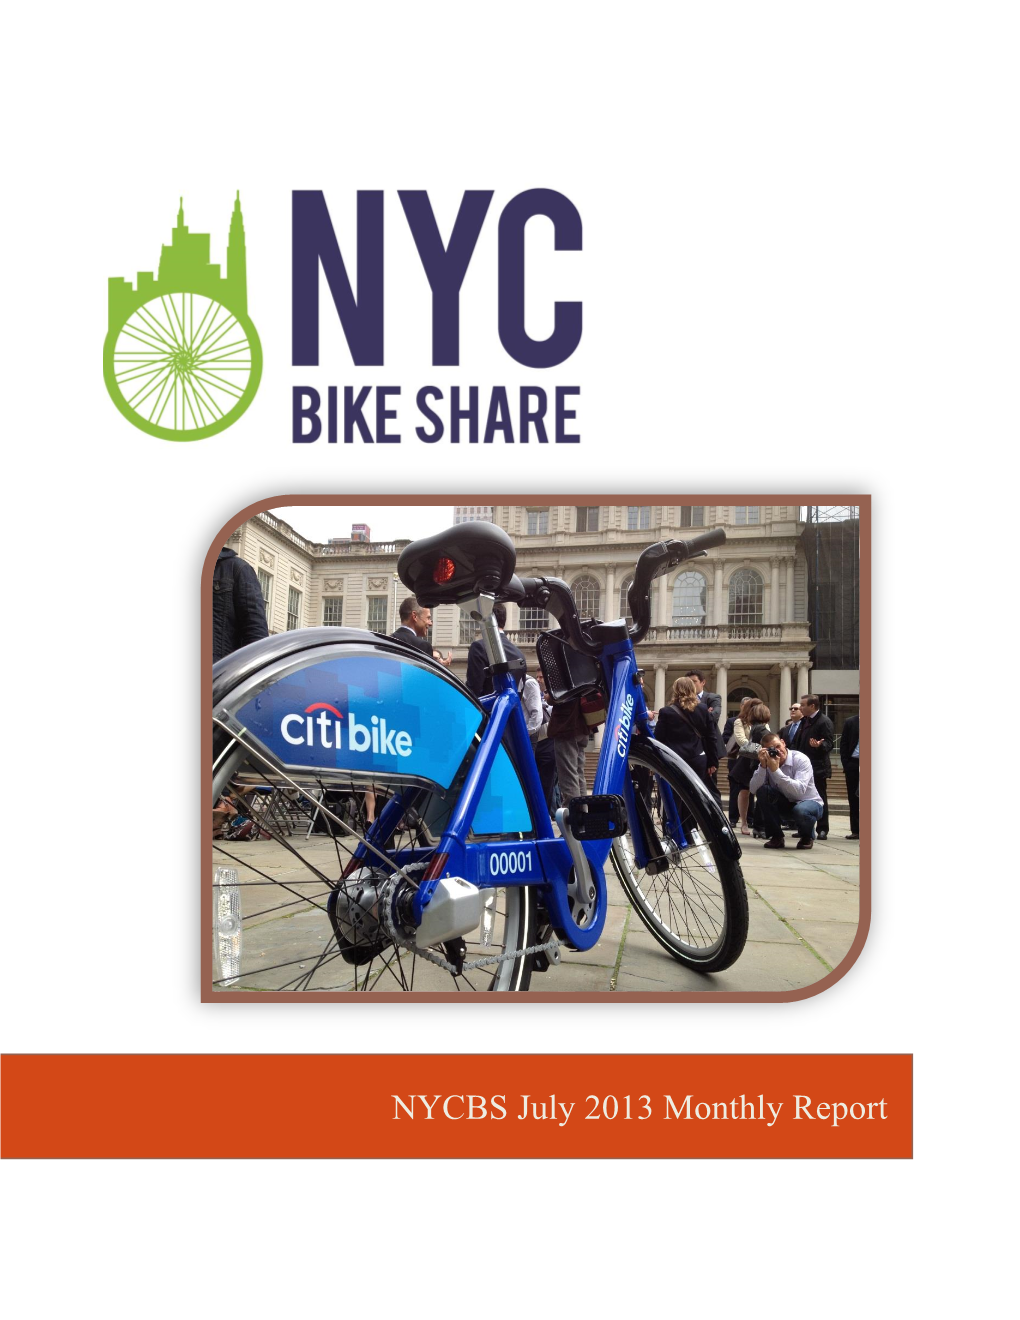 NYCBS July 2013 Monthly Report